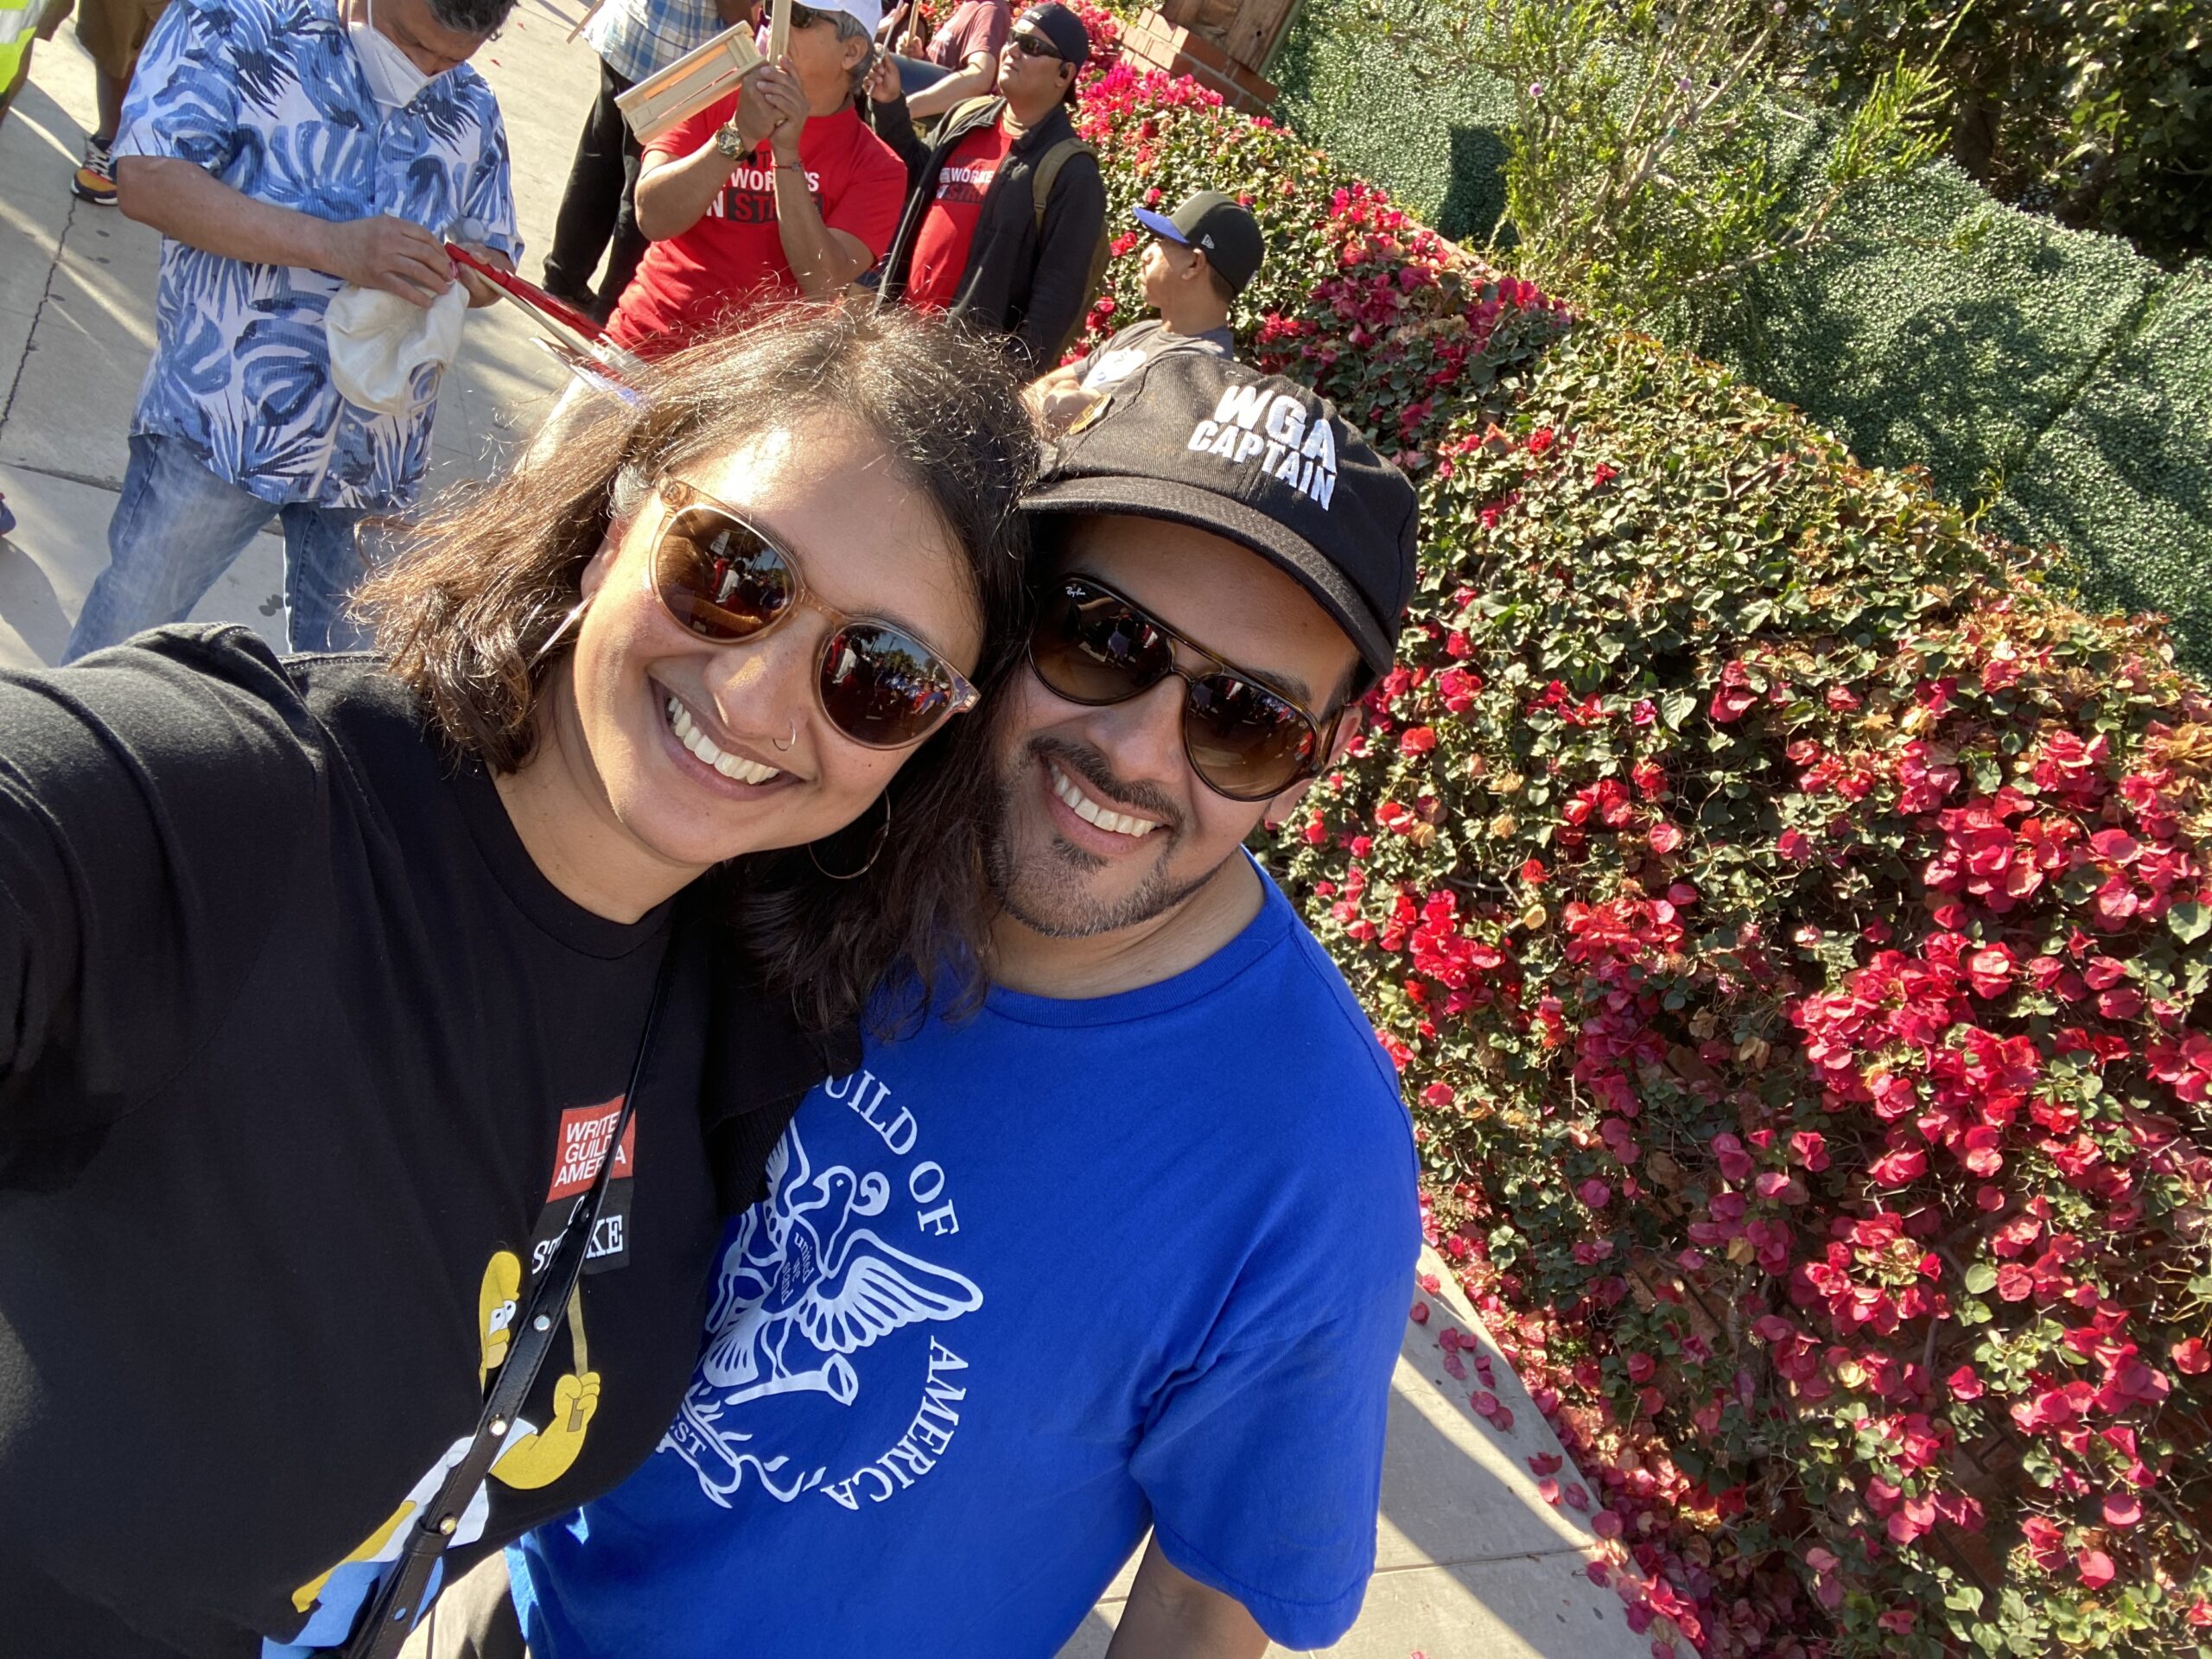 Manisha and her partner take a selfie in front of a flower bush on workers on strike in Los Angeles, CA. Manisha is wearing a black graphic t-shirt and sunglasses. Her partner is wearing a blue graphic t-shirt, sunglasses, and a black embroidered baseball cap that says WGA Captain.